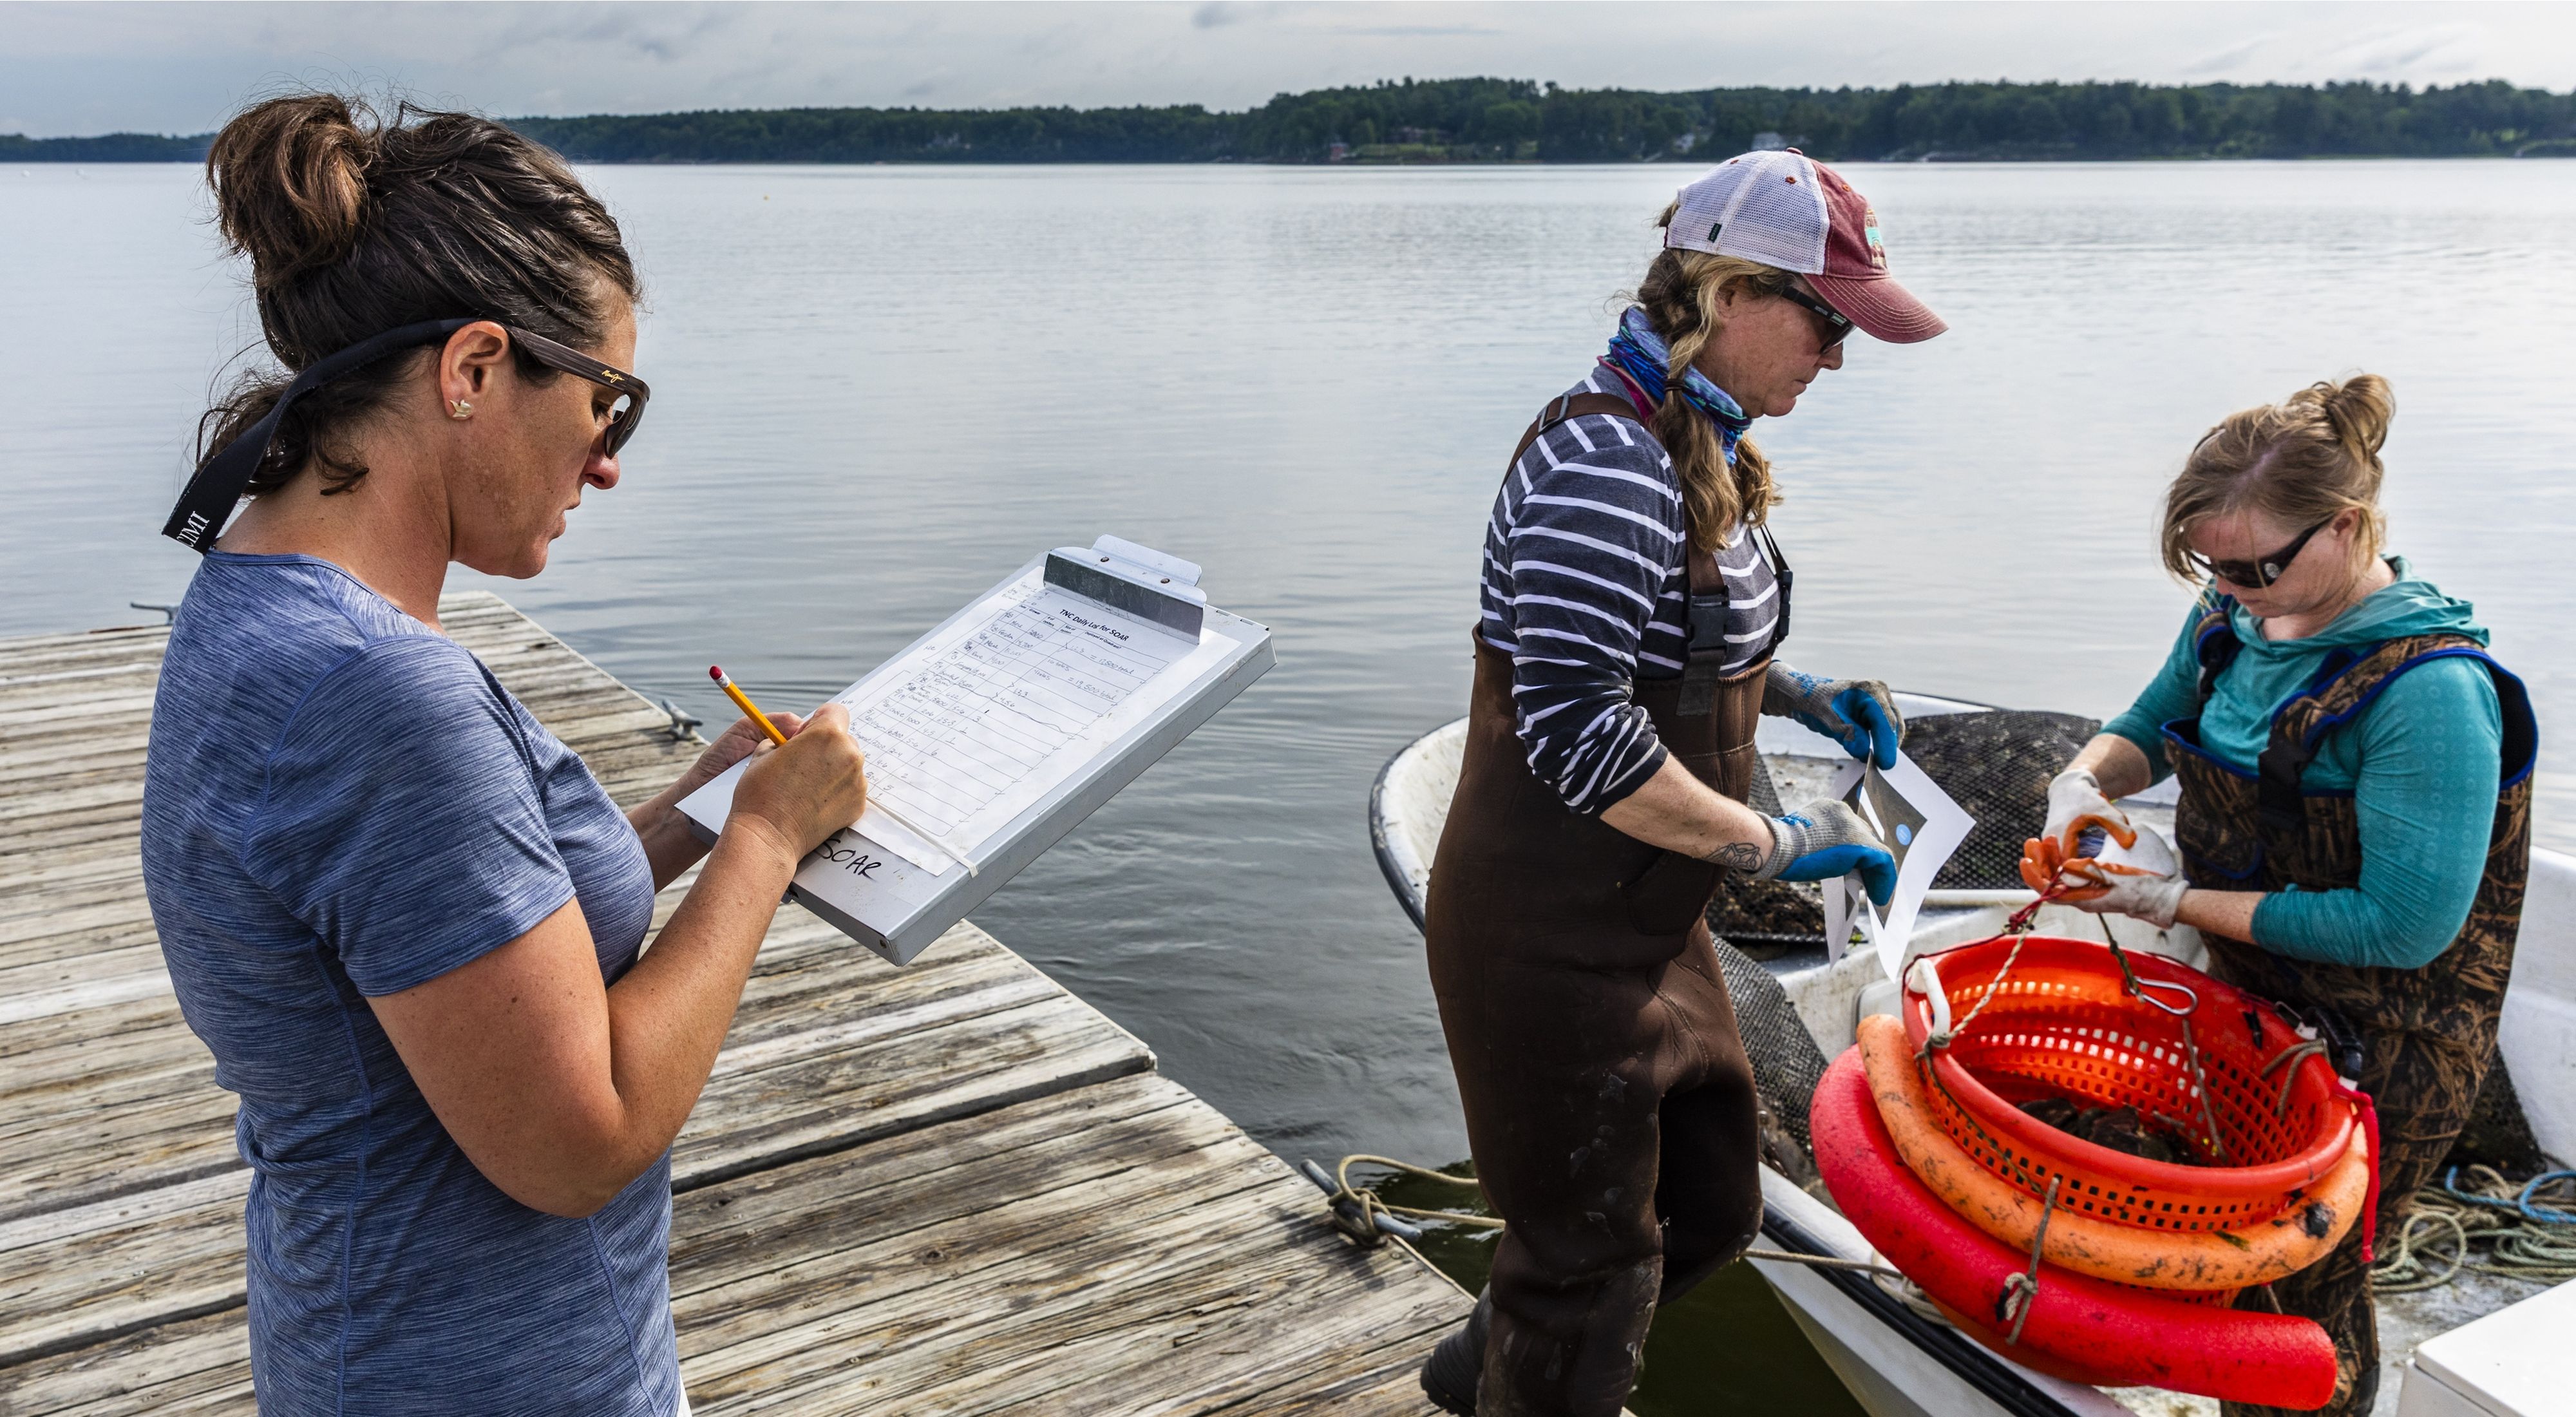 A woman stands on a dock, writing on a clip board, while two farmers load oysters onto a boat.